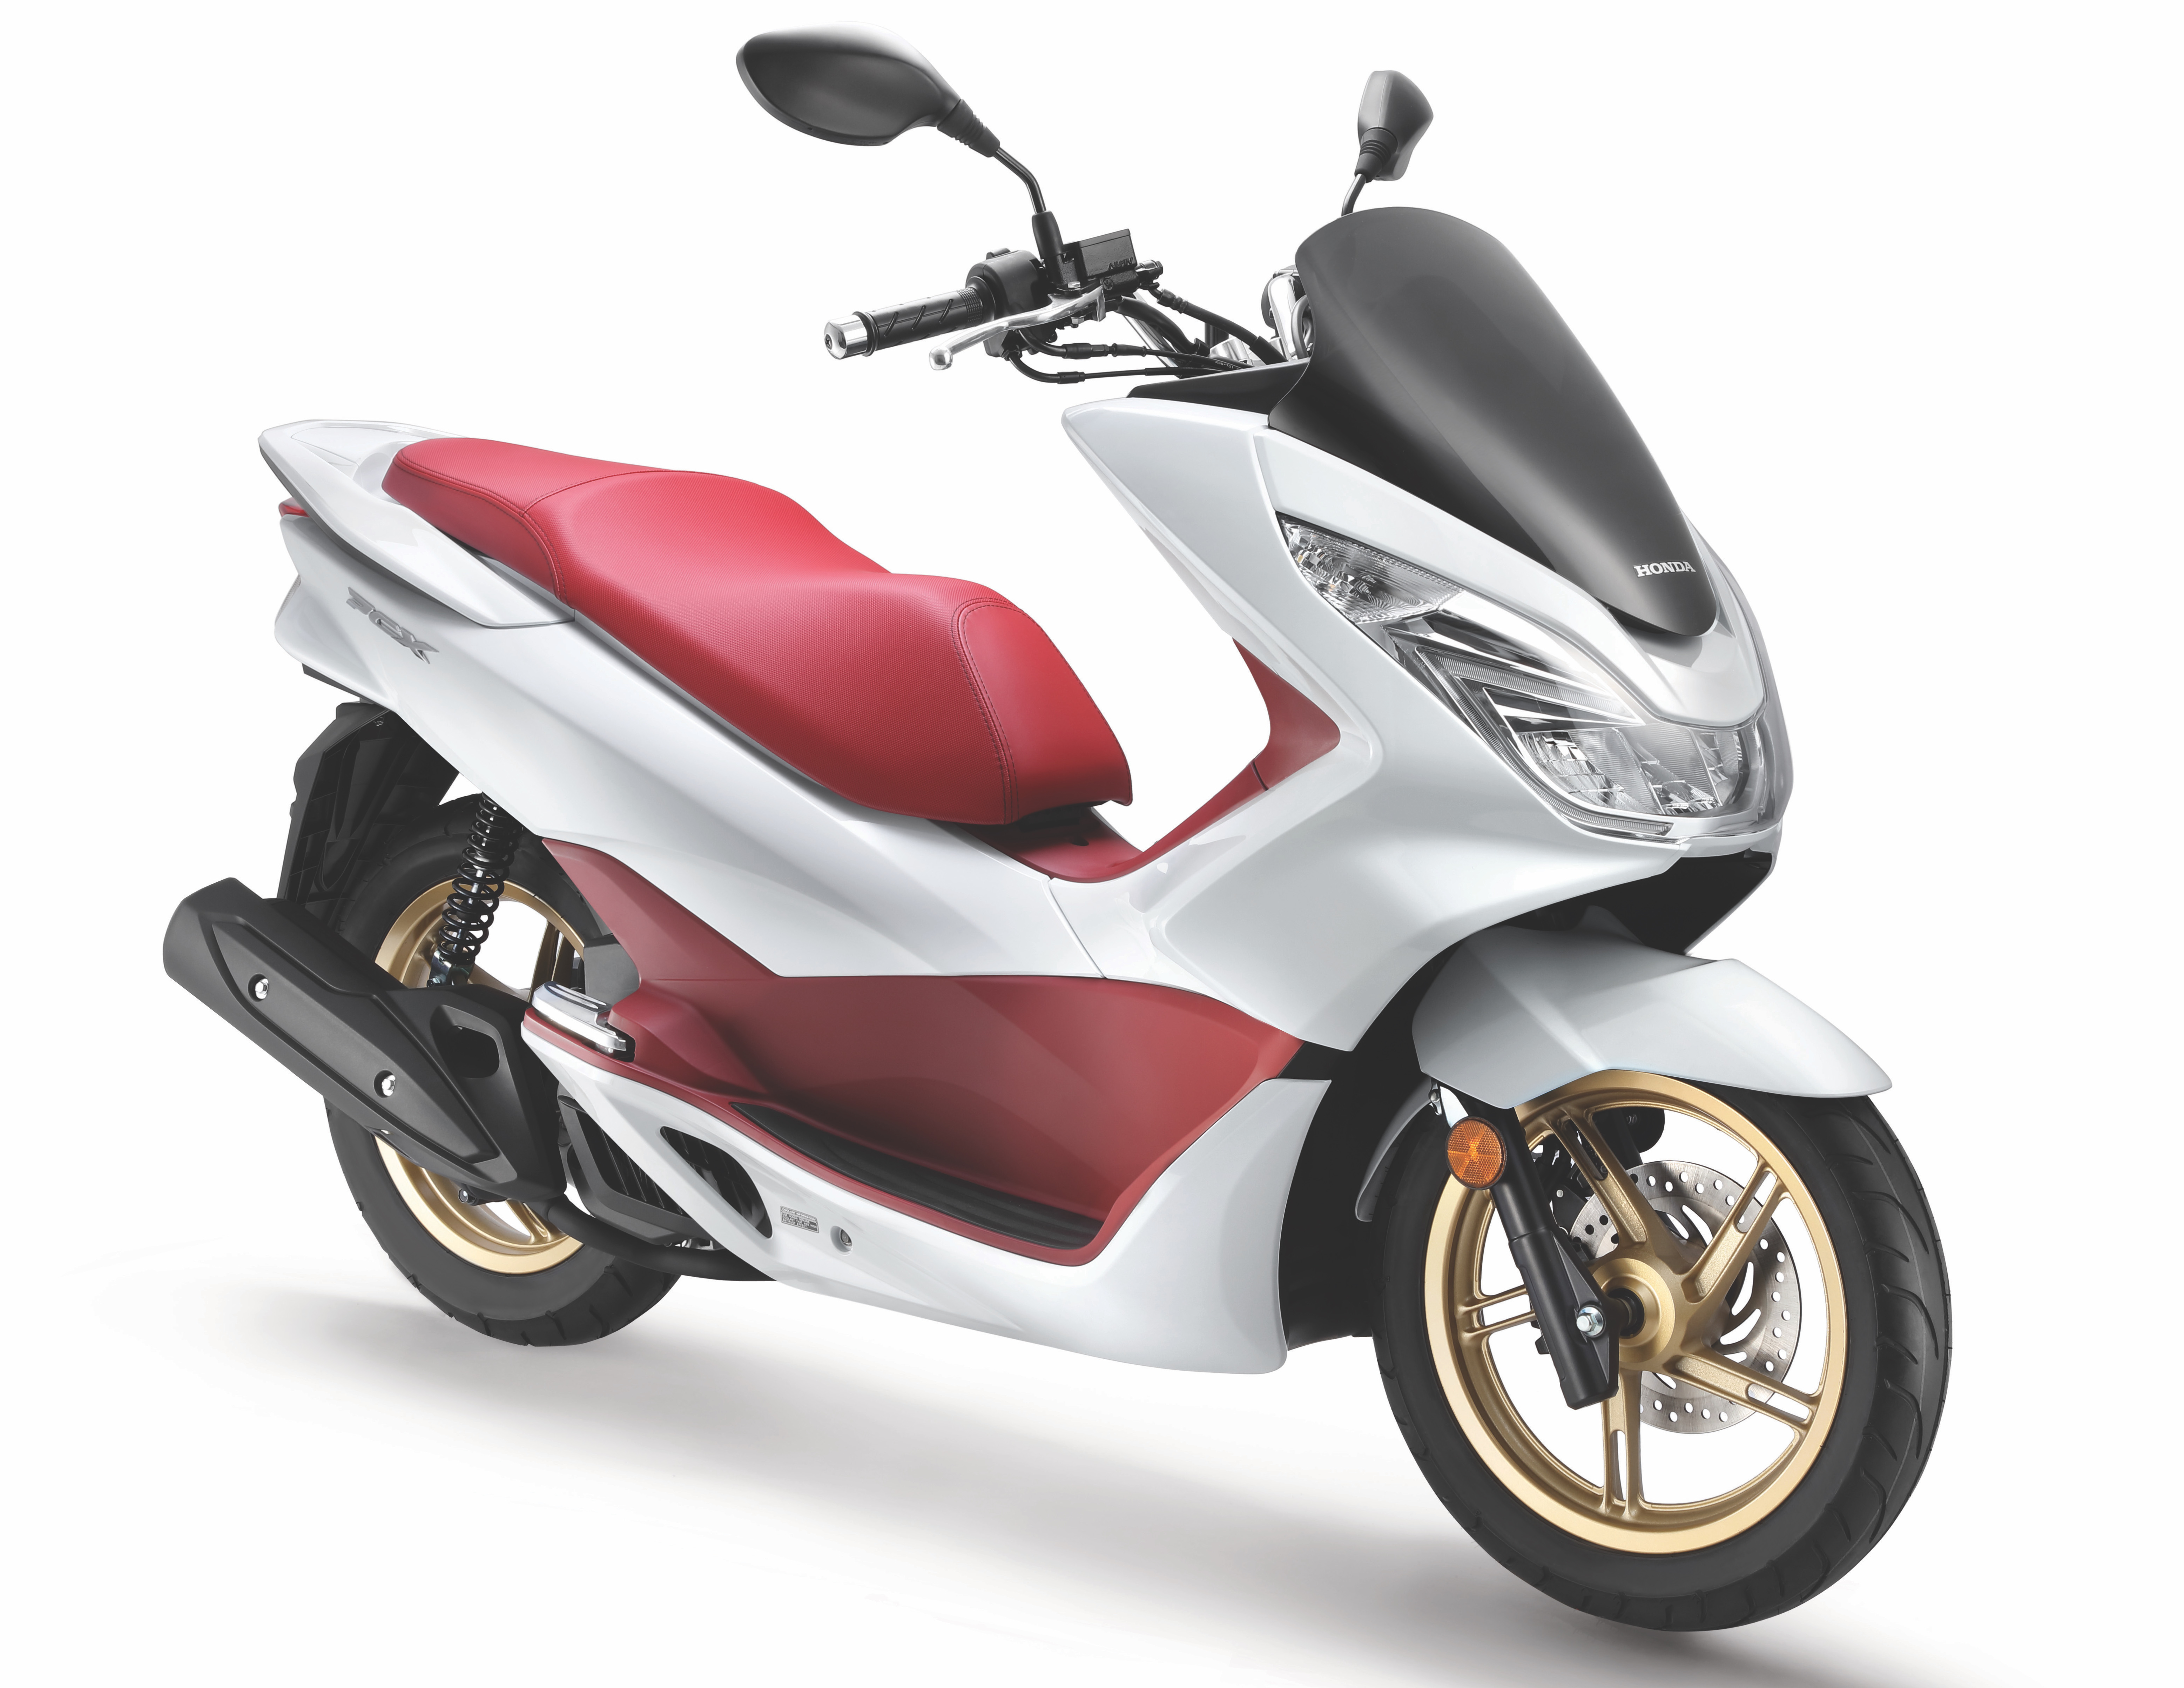 2017 Honda NSS300 and Honda PCX now in blue - priced at RM30,727 and ...